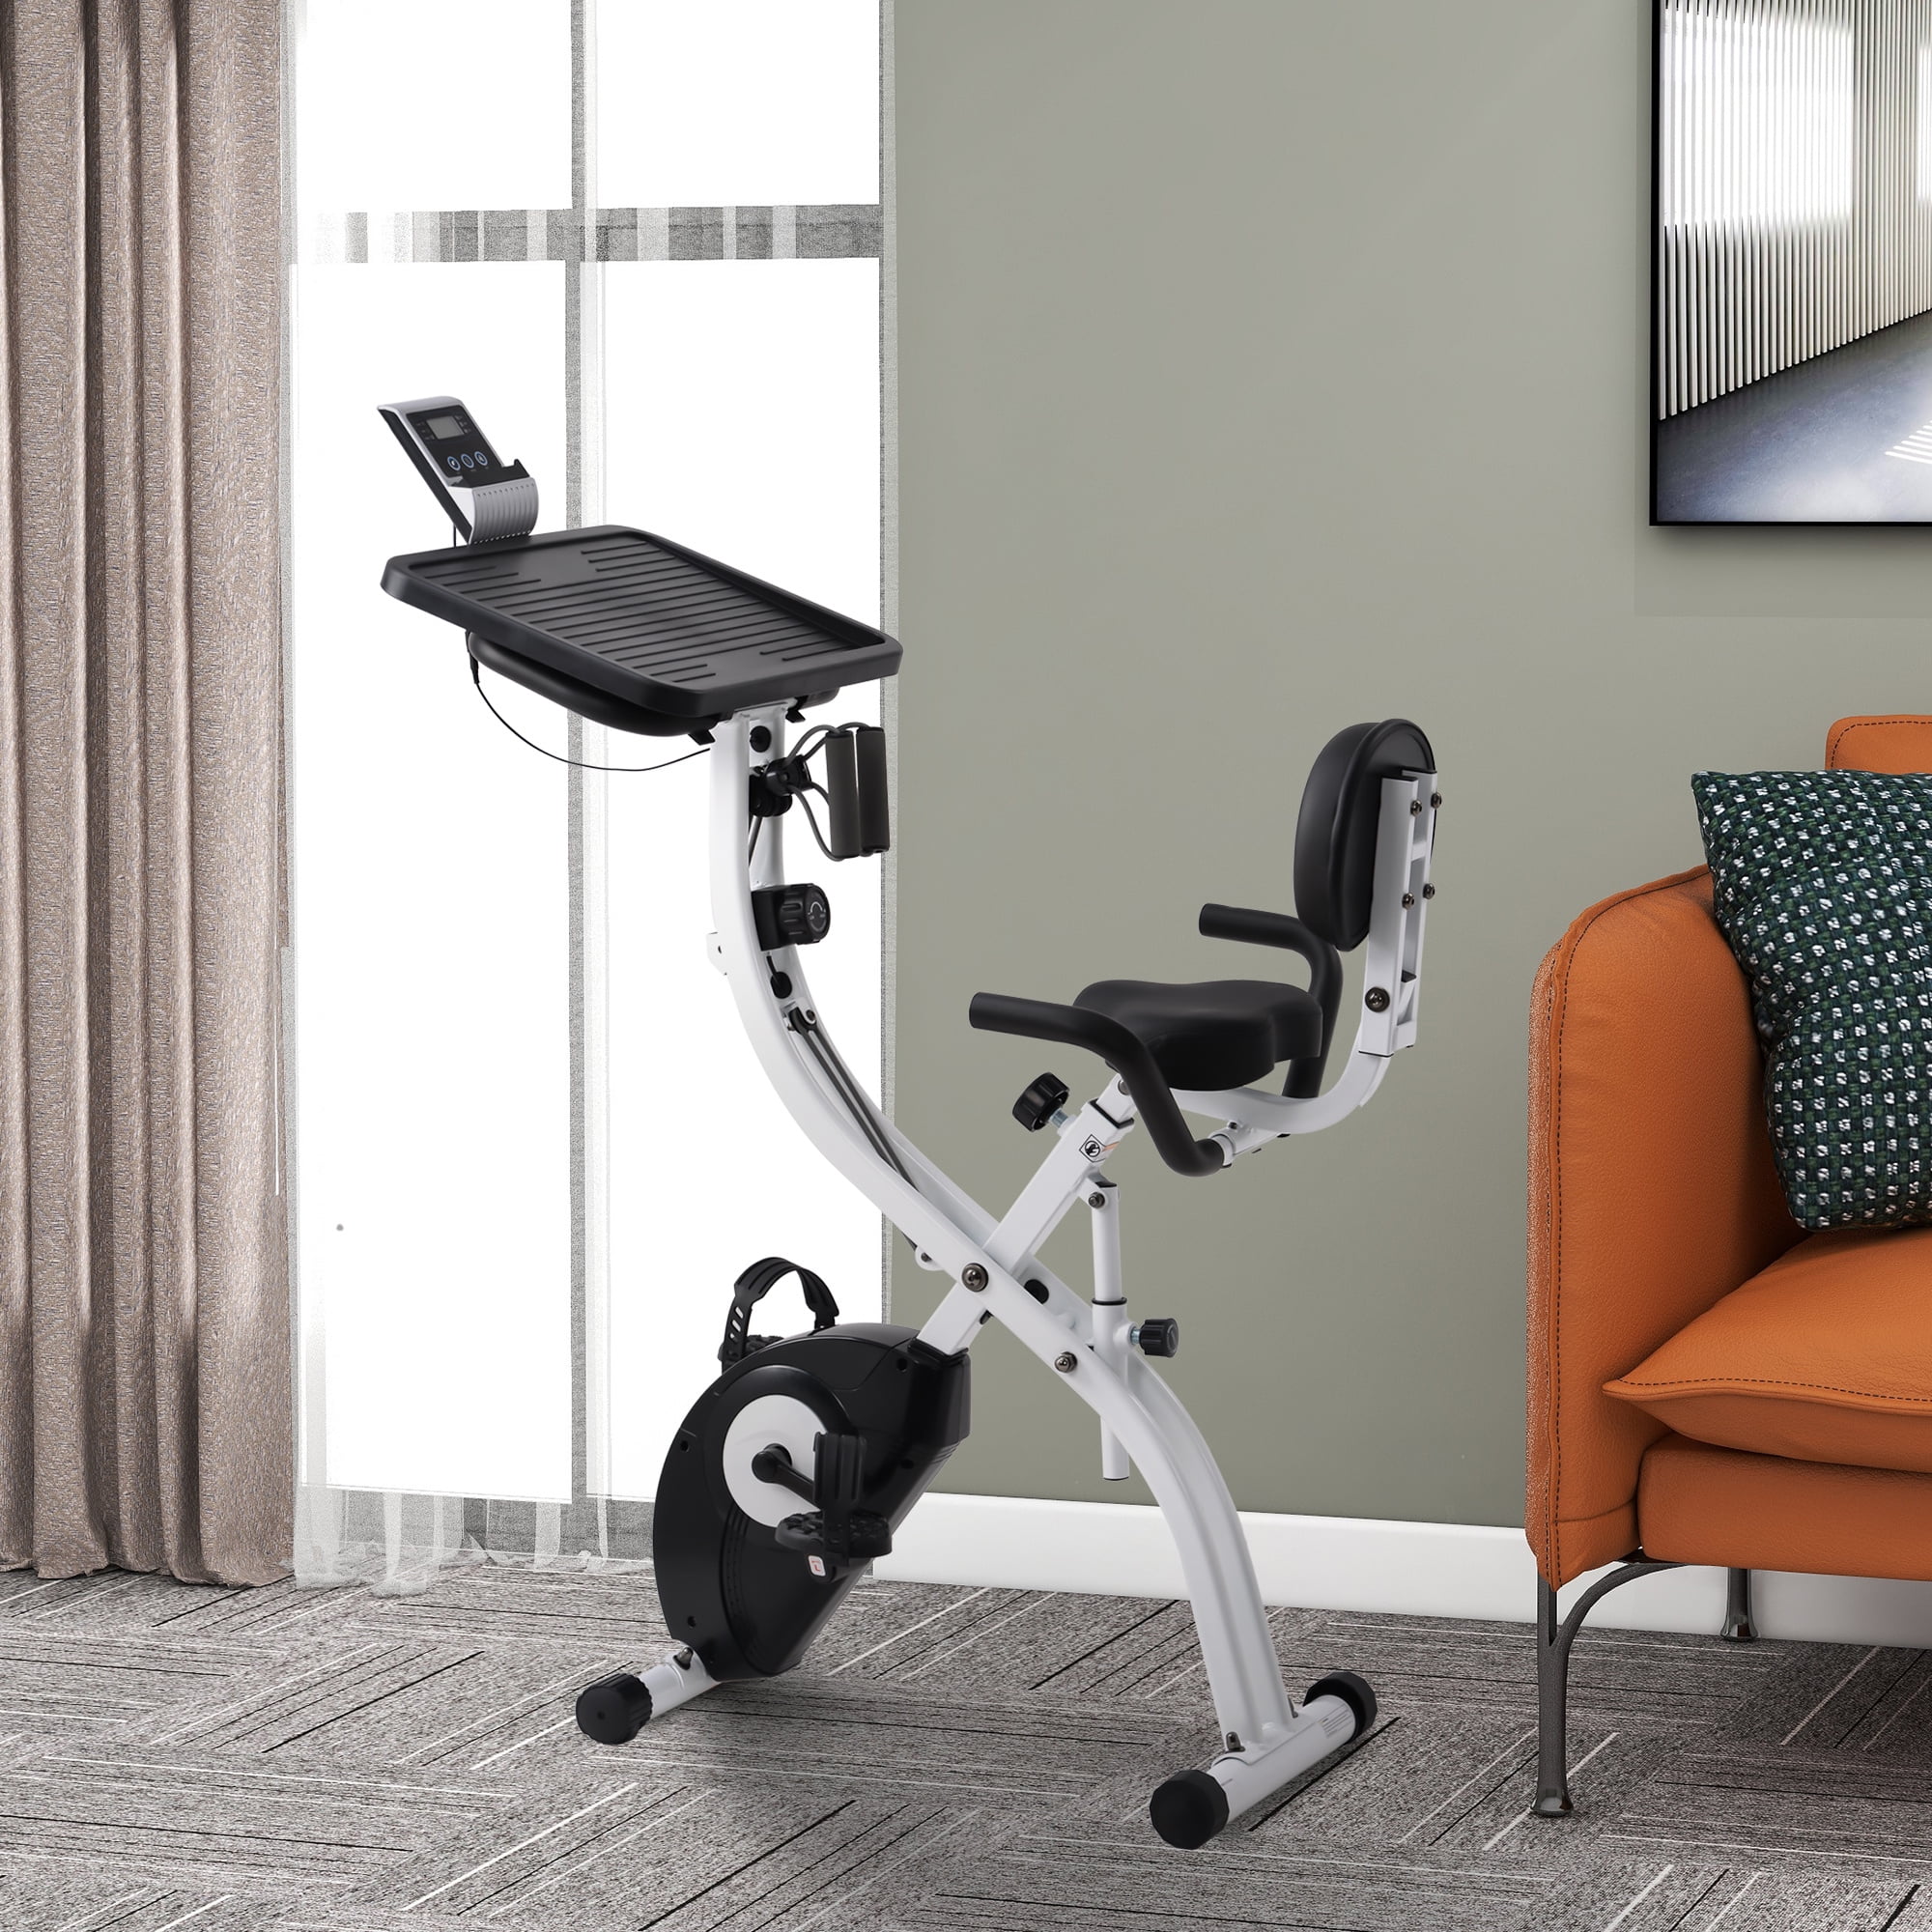 Bike from Fitness Exercise Bike Folding Easy to dismantle for Home with LCD 